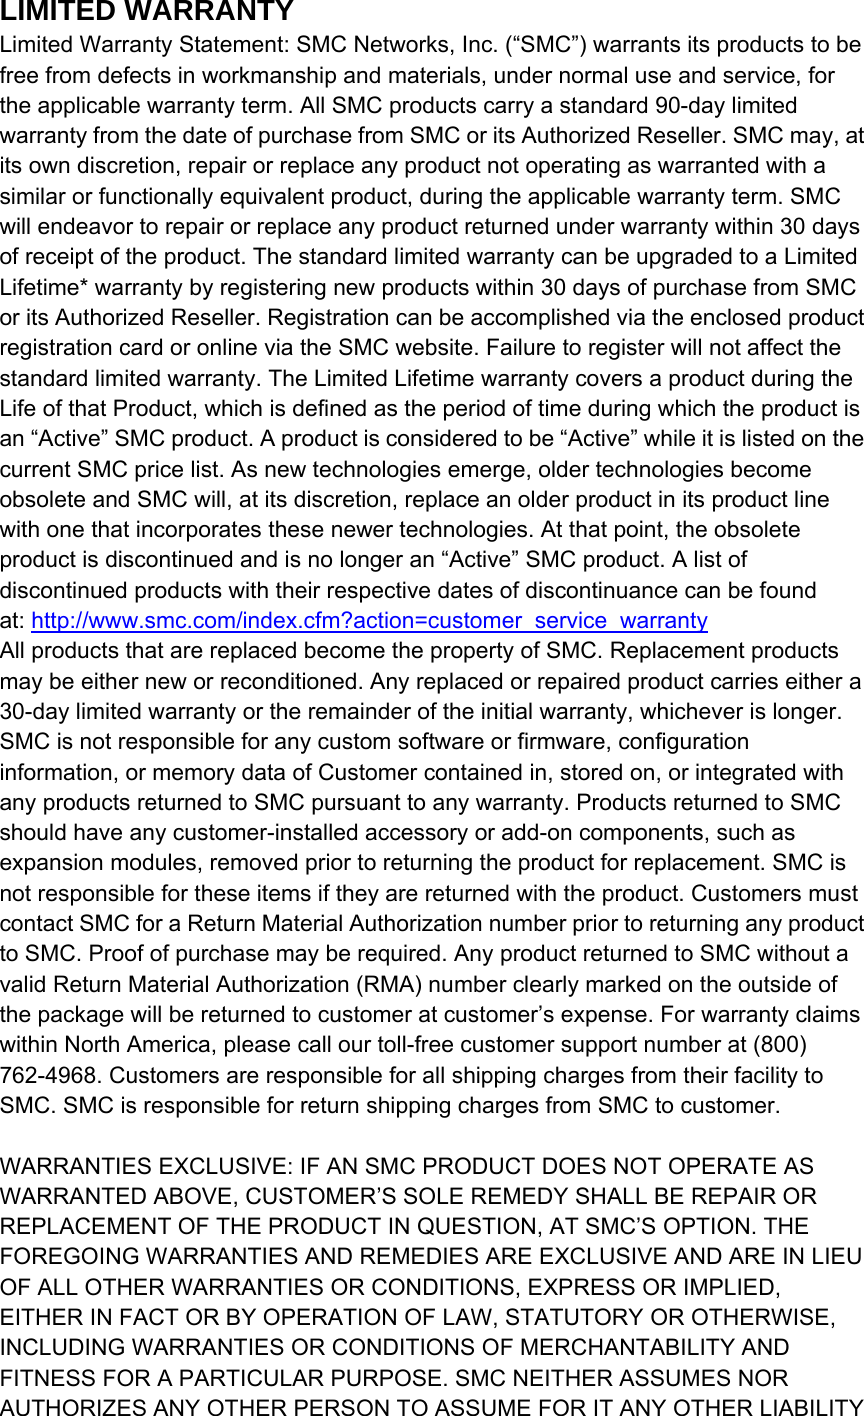 LIMITED WARRANTY Limited Warranty Statement: SMC Networks, Inc. (“SMC”) warrants its products to be free from defects in workmanship and materials, under normal use and service, for the applicable warranty term. All SMC products carry a standard 90-day limited warranty from the date of purchase from SMC or its Authorized Reseller. SMC may, at its own discretion, repair or replace any product not operating as warranted with a similar or functionally equivalent product, during the applicable warranty term. SMC will endeavor to repair or replace any product returned under warranty within 30 days of receipt of the product. The standard limited warranty can be upgraded to a Limited Lifetime* warranty by registering new products within 30 days of purchase from SMC or its Authorized Reseller. Registration can be accomplished via the enclosed product registration card or online via the SMC website. Failure to register will not affect the standard limited warranty. The Limited Lifetime warranty covers a product during the Life of that Product, which is defined as the period of time during which the product is an “Active” SMC product. A product is considered to be “Active” while it is listed on the current SMC price list. As new technologies emerge, older technologies become obsolete and SMC will, at its discretion, replace an older product in its product line with one that incorporates these newer technologies. At that point, the obsolete product is discontinued and is no longer an “Active” SMC product. A list of discontinued products with their respective dates of discontinuance can be found at: http://www.smc.com/index.cfm?action=customer_service_warranty All products that are replaced become the property of SMC. Replacement products may be either new or reconditioned. Any replaced or repaired product carries either a 30-day limited warranty or the remainder of the initial warranty, whichever is longer. SMC is not responsible for any custom software or firmware, configuration information, or memory data of Customer contained in, stored on, or integrated with any products returned to SMC pursuant to any warranty. Products returned to SMC should have any customer-installed accessory or add-on components, such as expansion modules, removed prior to returning the product for replacement. SMC is not responsible for these items if they are returned with the product. Customers must contact SMC for a Return Material Authorization number prior to returning any product to SMC. Proof of purchase may be required. Any product returned to SMC without a valid Return Material Authorization (RMA) number clearly marked on the outside of the package will be returned to customer at customer’s expense. For warranty claims within North America, please call our toll-free customer support number at (800) 762-4968. Customers are responsible for all shipping charges from their facility to SMC. SMC is responsible for return shipping charges from SMC to customer.  WARRANTIES EXCLUSIVE: IF AN SMC PRODUCT DOES NOT OPERATE AS WARRANTED ABOVE, CUSTOMER’S SOLE REMEDY SHALL BE REPAIR OR REPLACEMENT OF THE PRODUCT IN QUESTION, AT SMC’S OPTION. THE FOREGOING WARRANTIES AND REMEDIES ARE EXCLUSIVE AND ARE IN LIEU OF ALL OTHER WARRANTIES OR CONDITIONS, EXPRESS OR IMPLIED, EITHER IN FACT OR BY OPERATION OF LAW, STATUTORY OR OTHERWISE, INCLUDING WARRANTIES OR CONDITIONS OF MERCHANTABILITY AND FITNESS FOR A PARTICULAR PURPOSE. SMC NEITHER ASSUMES NOR AUTHORIZES ANY OTHER PERSON TO ASSUME FOR IT ANY OTHER LIABILITY 